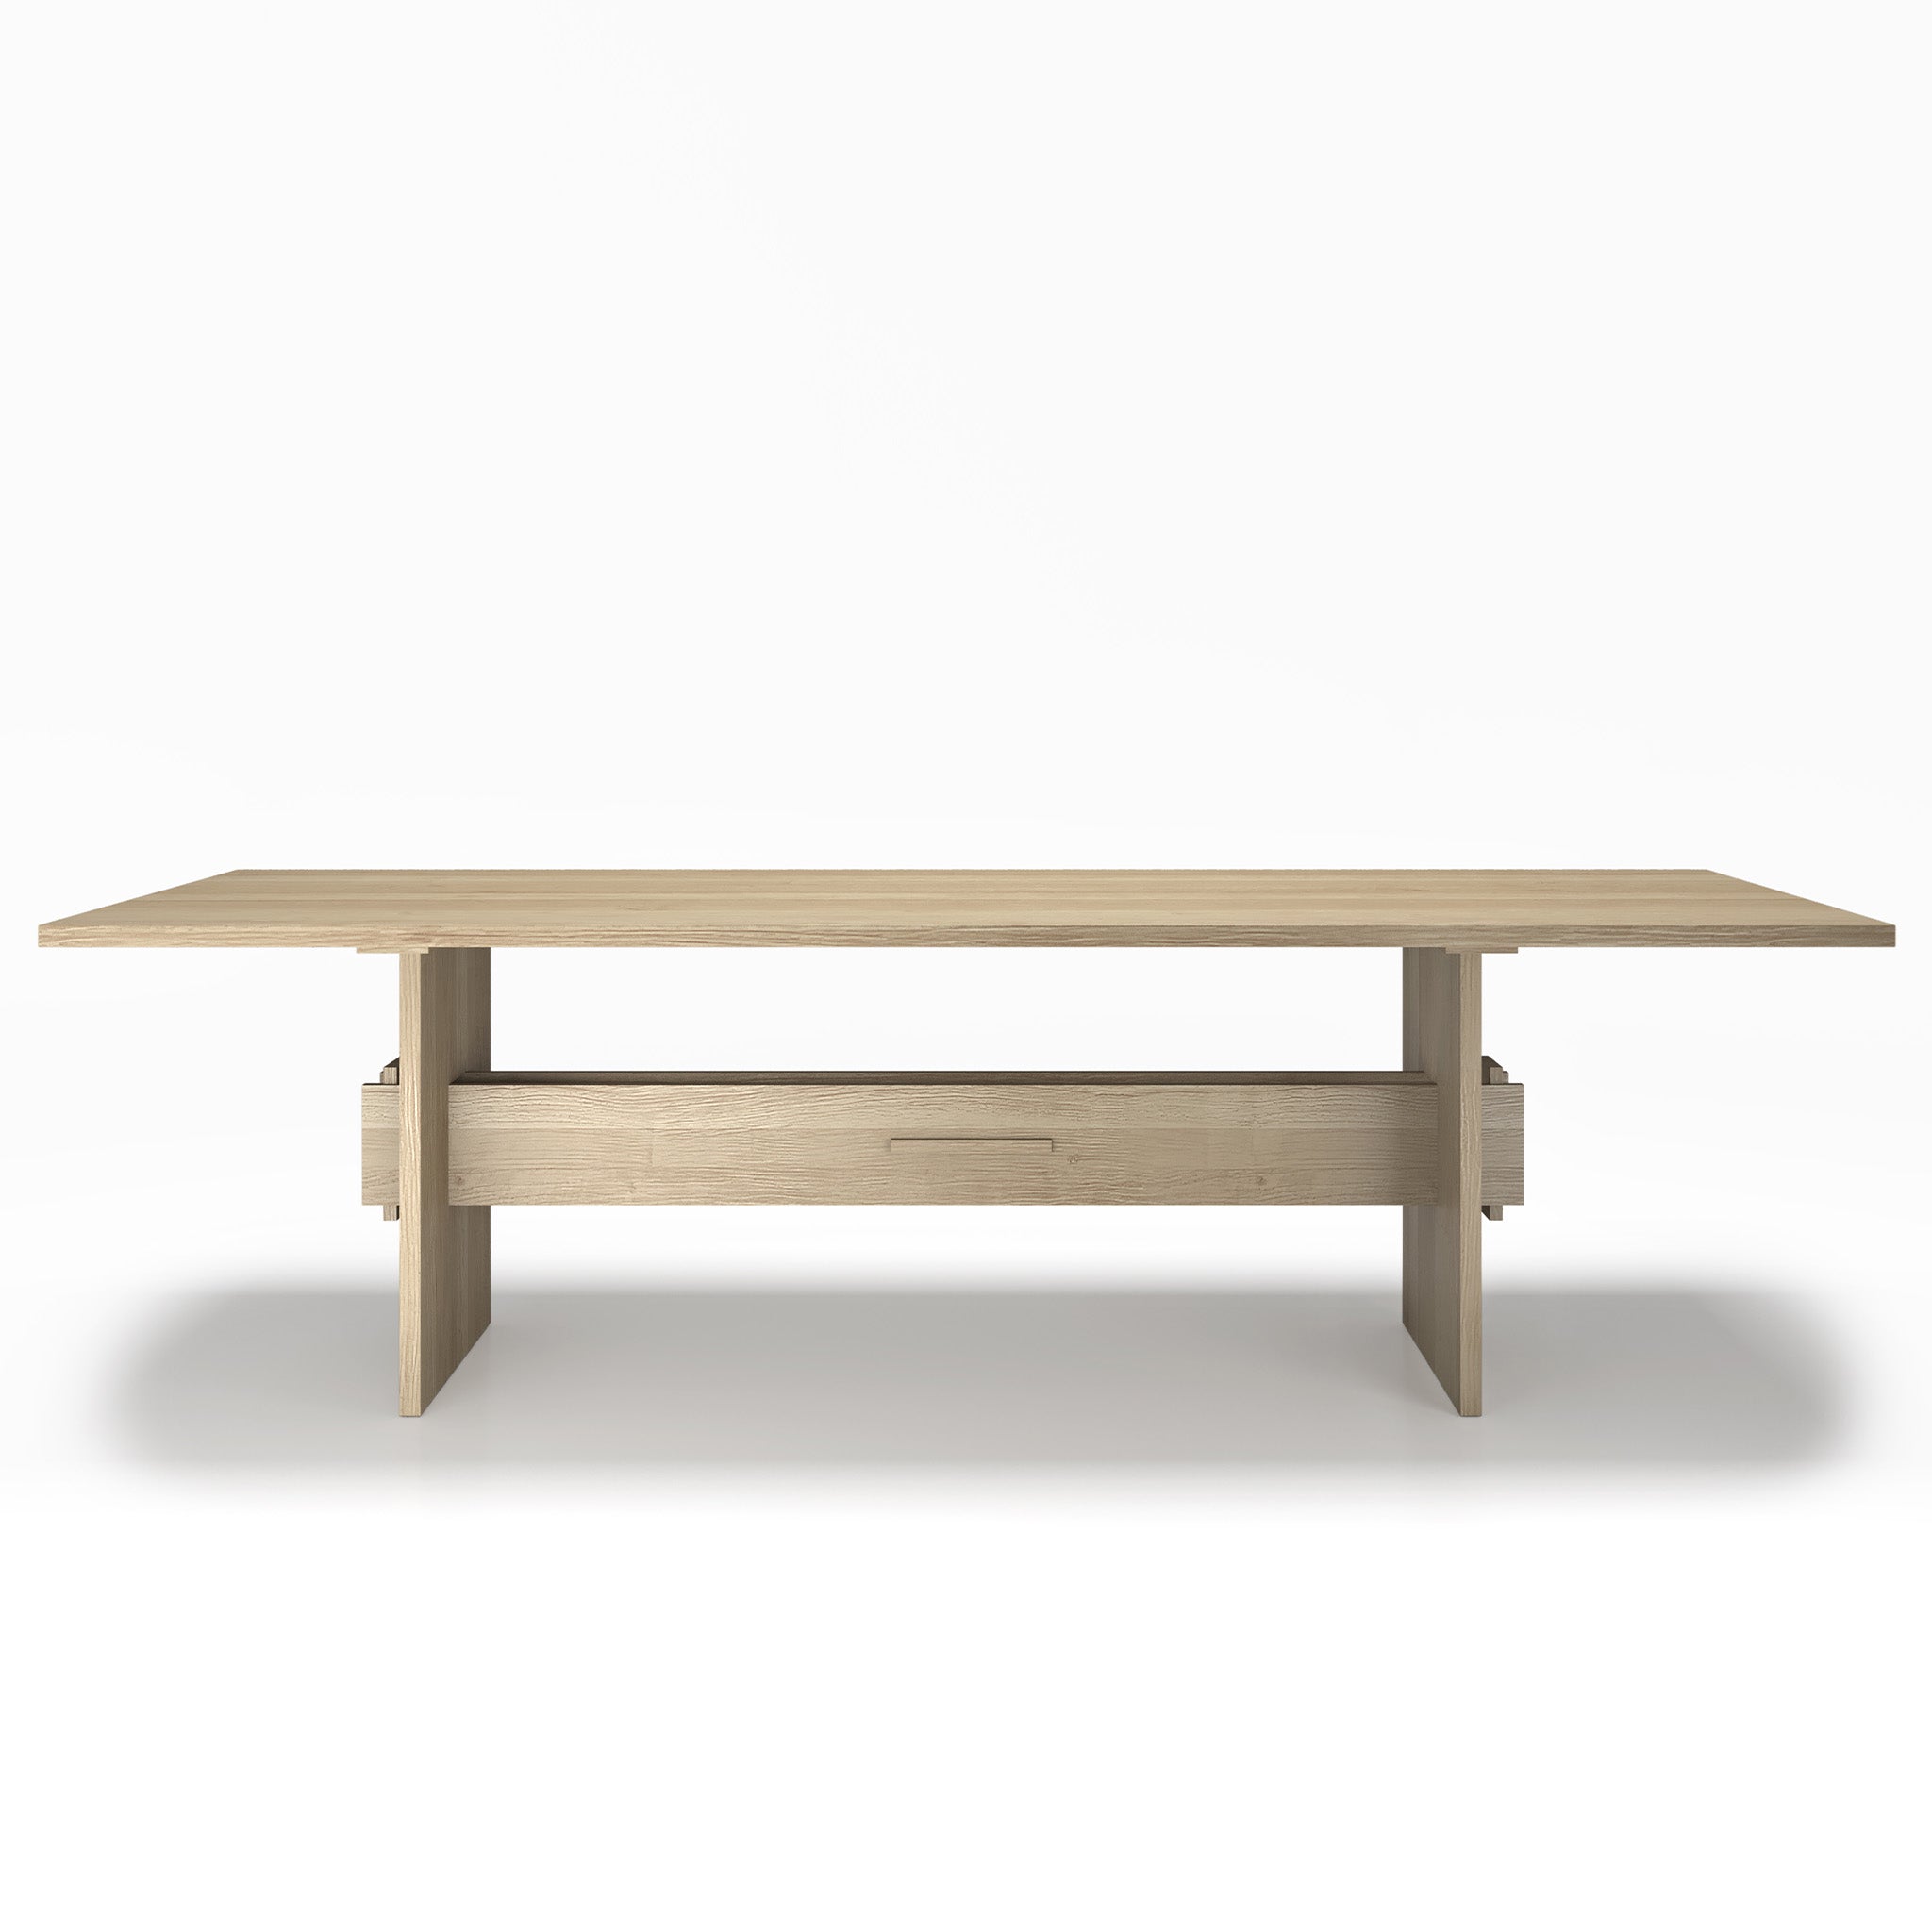 Jeppe Utzon Table #2 by Jeppe Utzon for Dk3